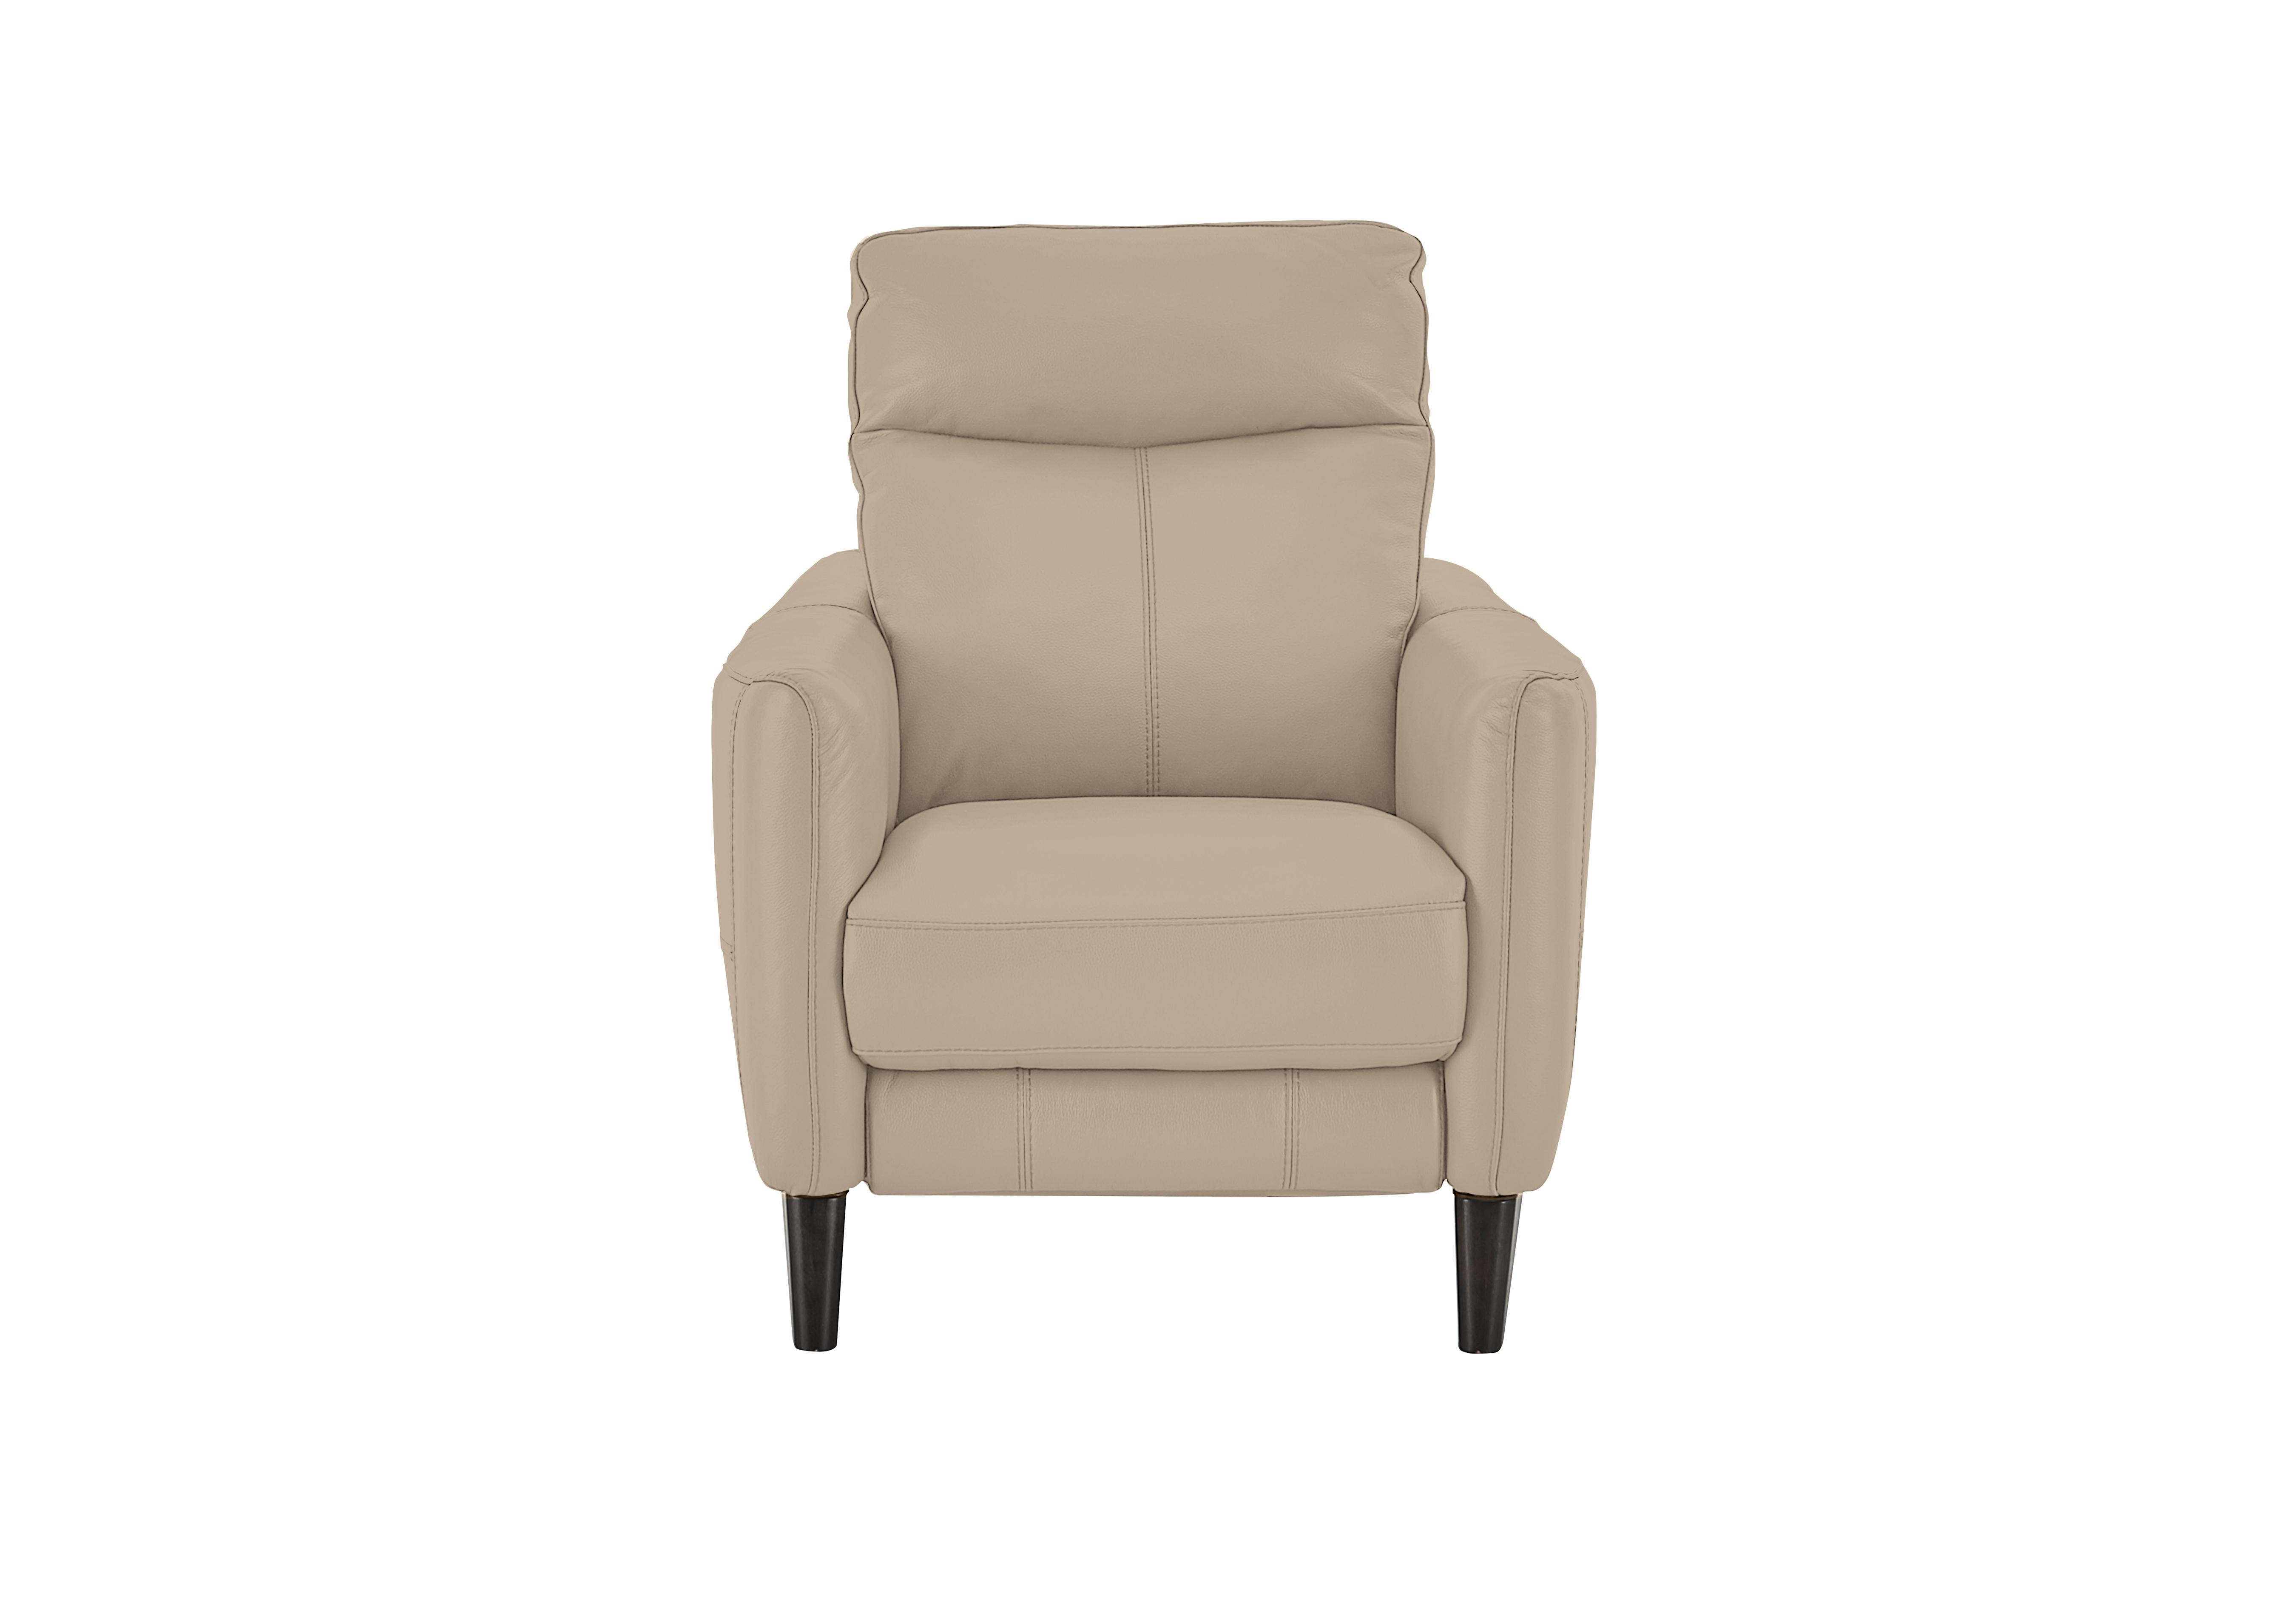 Compact Collection Petit Leather Recliner Armchair in Bv-039c Pebble on Furniture Village